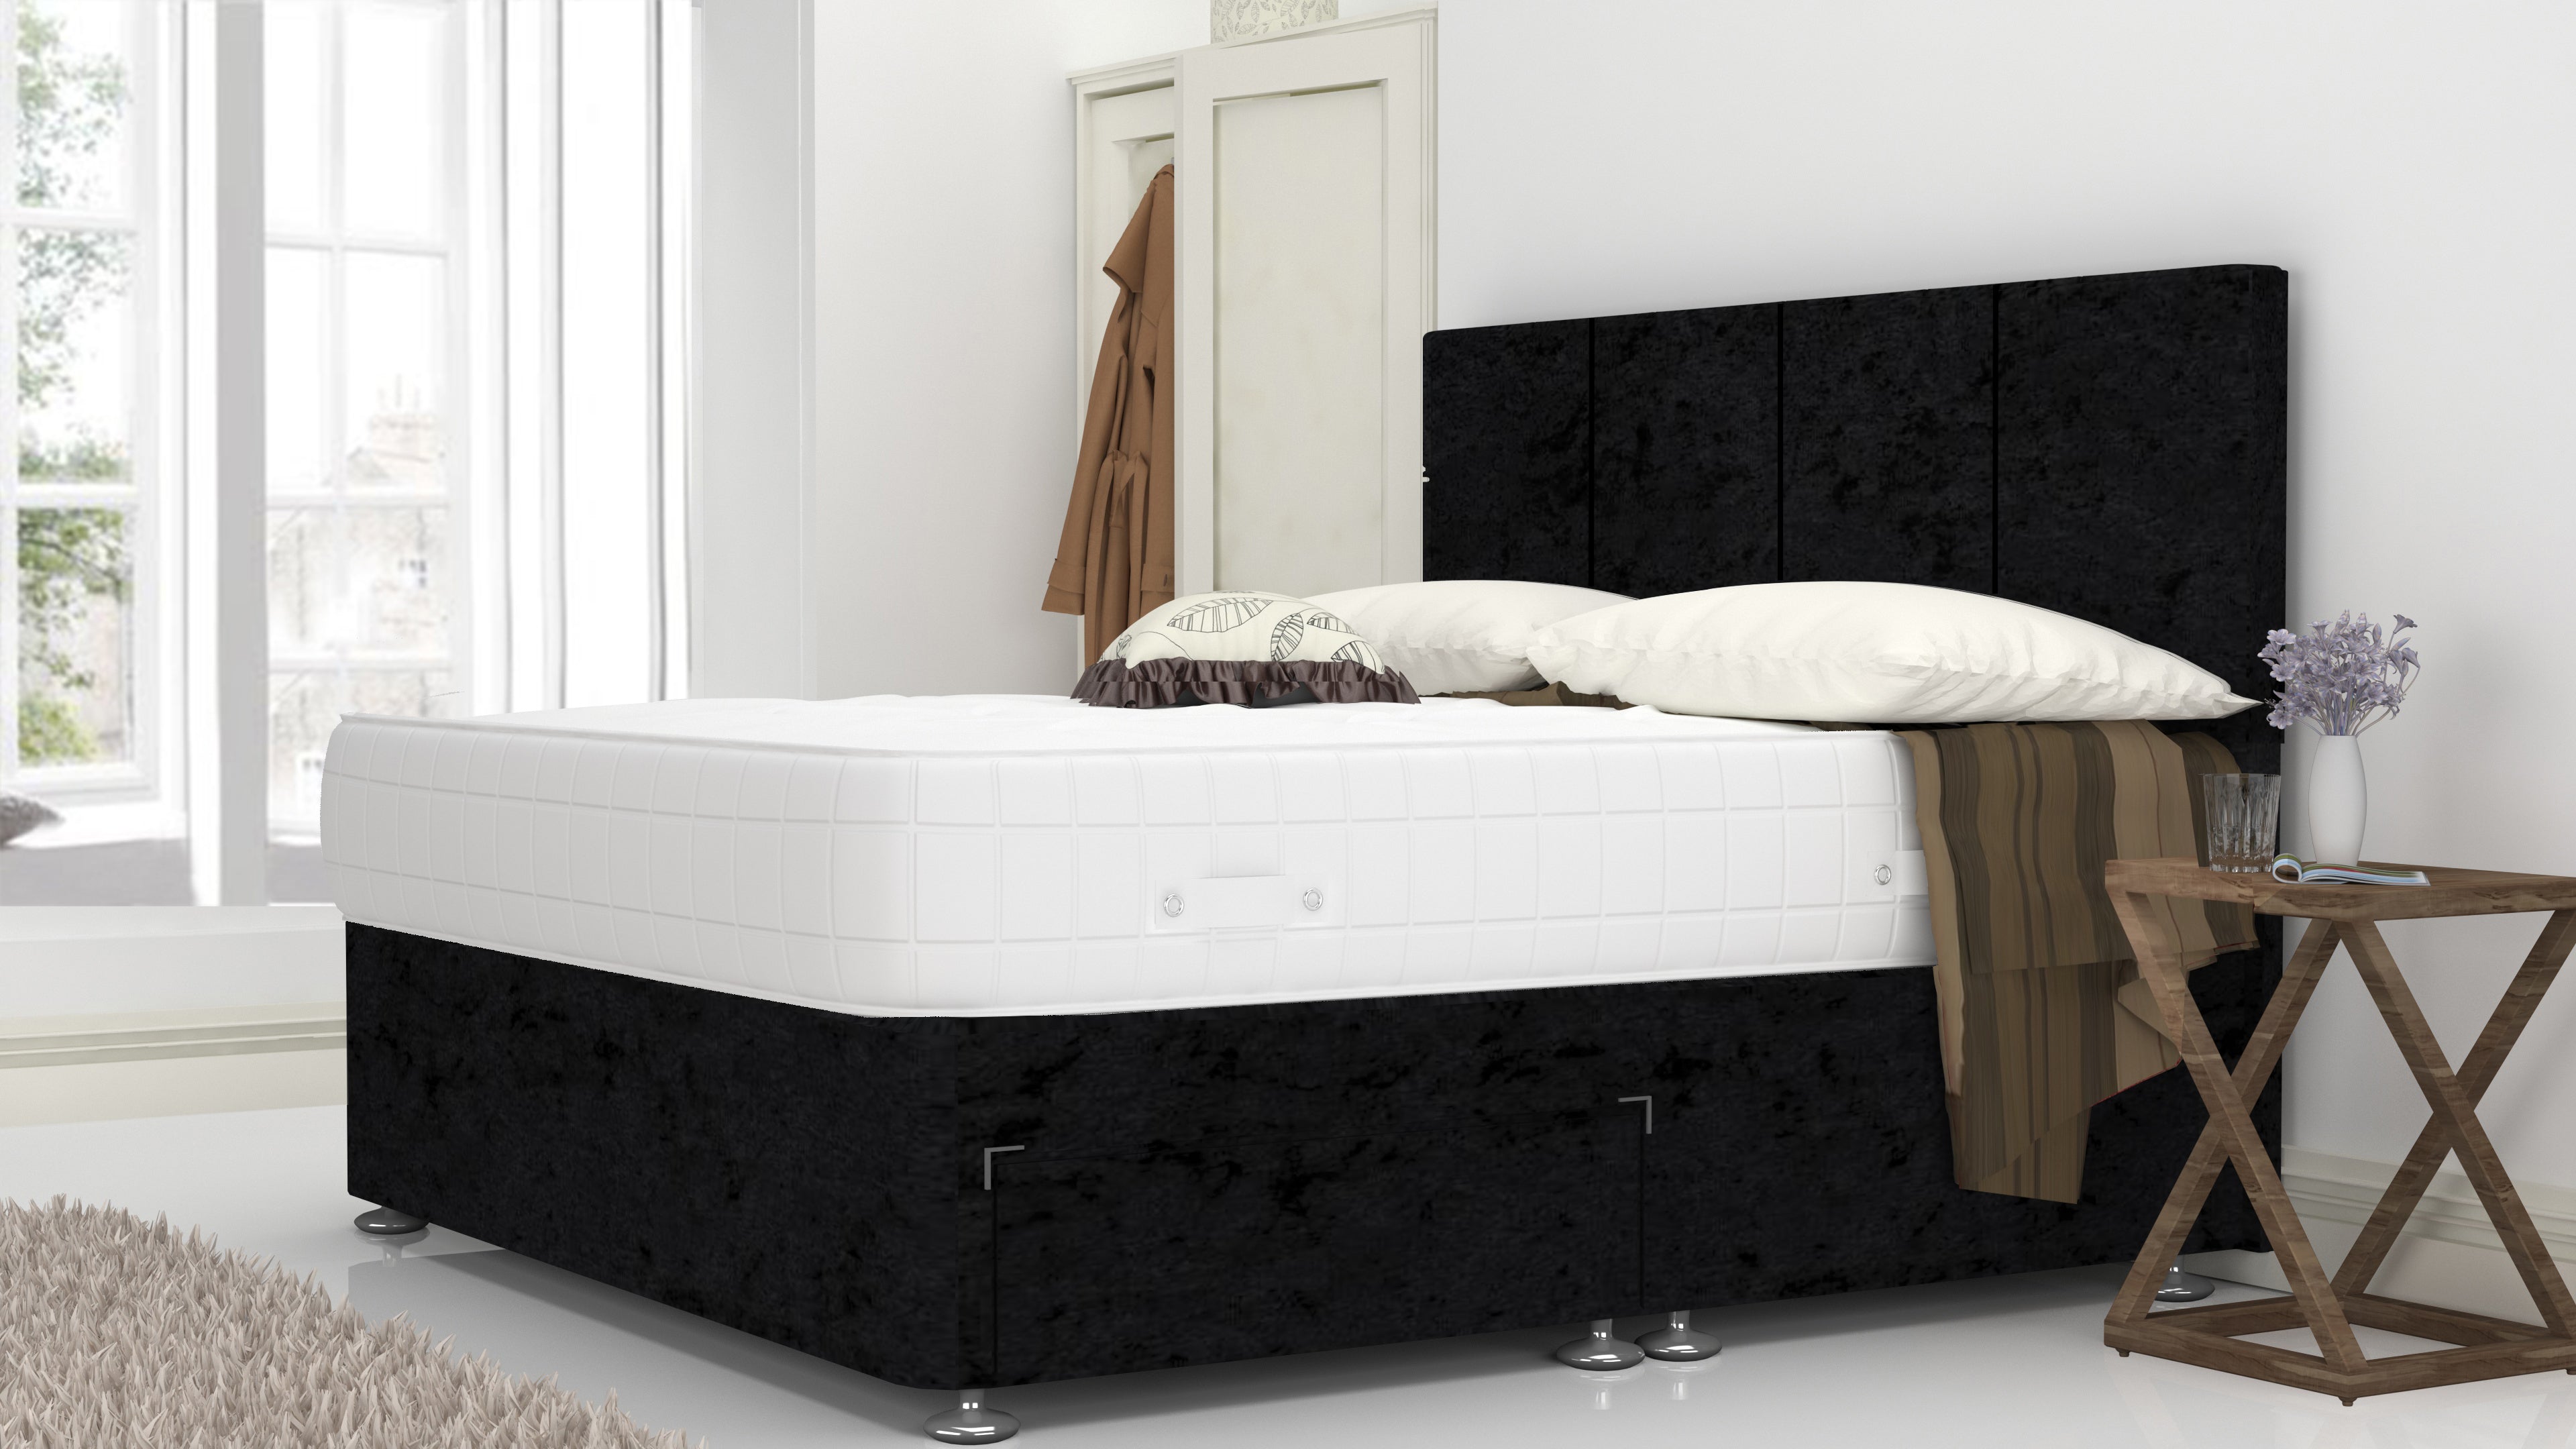 Black Crushed 5 Feet Divan Bed Set With 4 Panel Headboard (Included Feet) And Free Tinsel Top Mattress